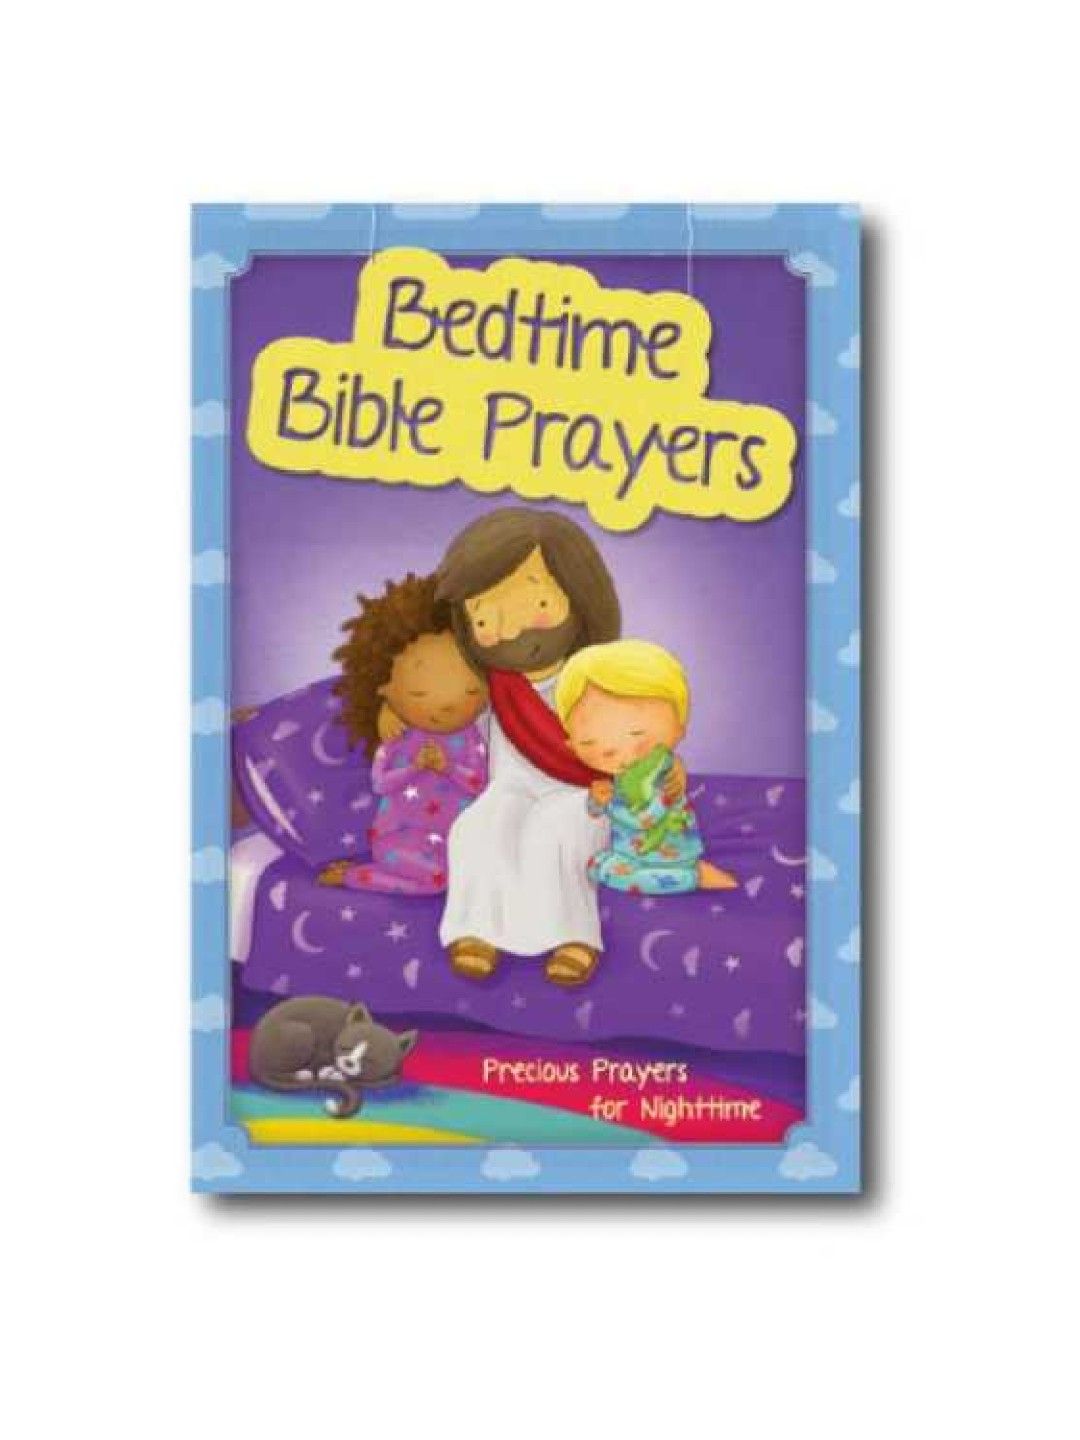 Easy To Learn Bedtime Bible Prayers - Precious Prayers for Nighttime